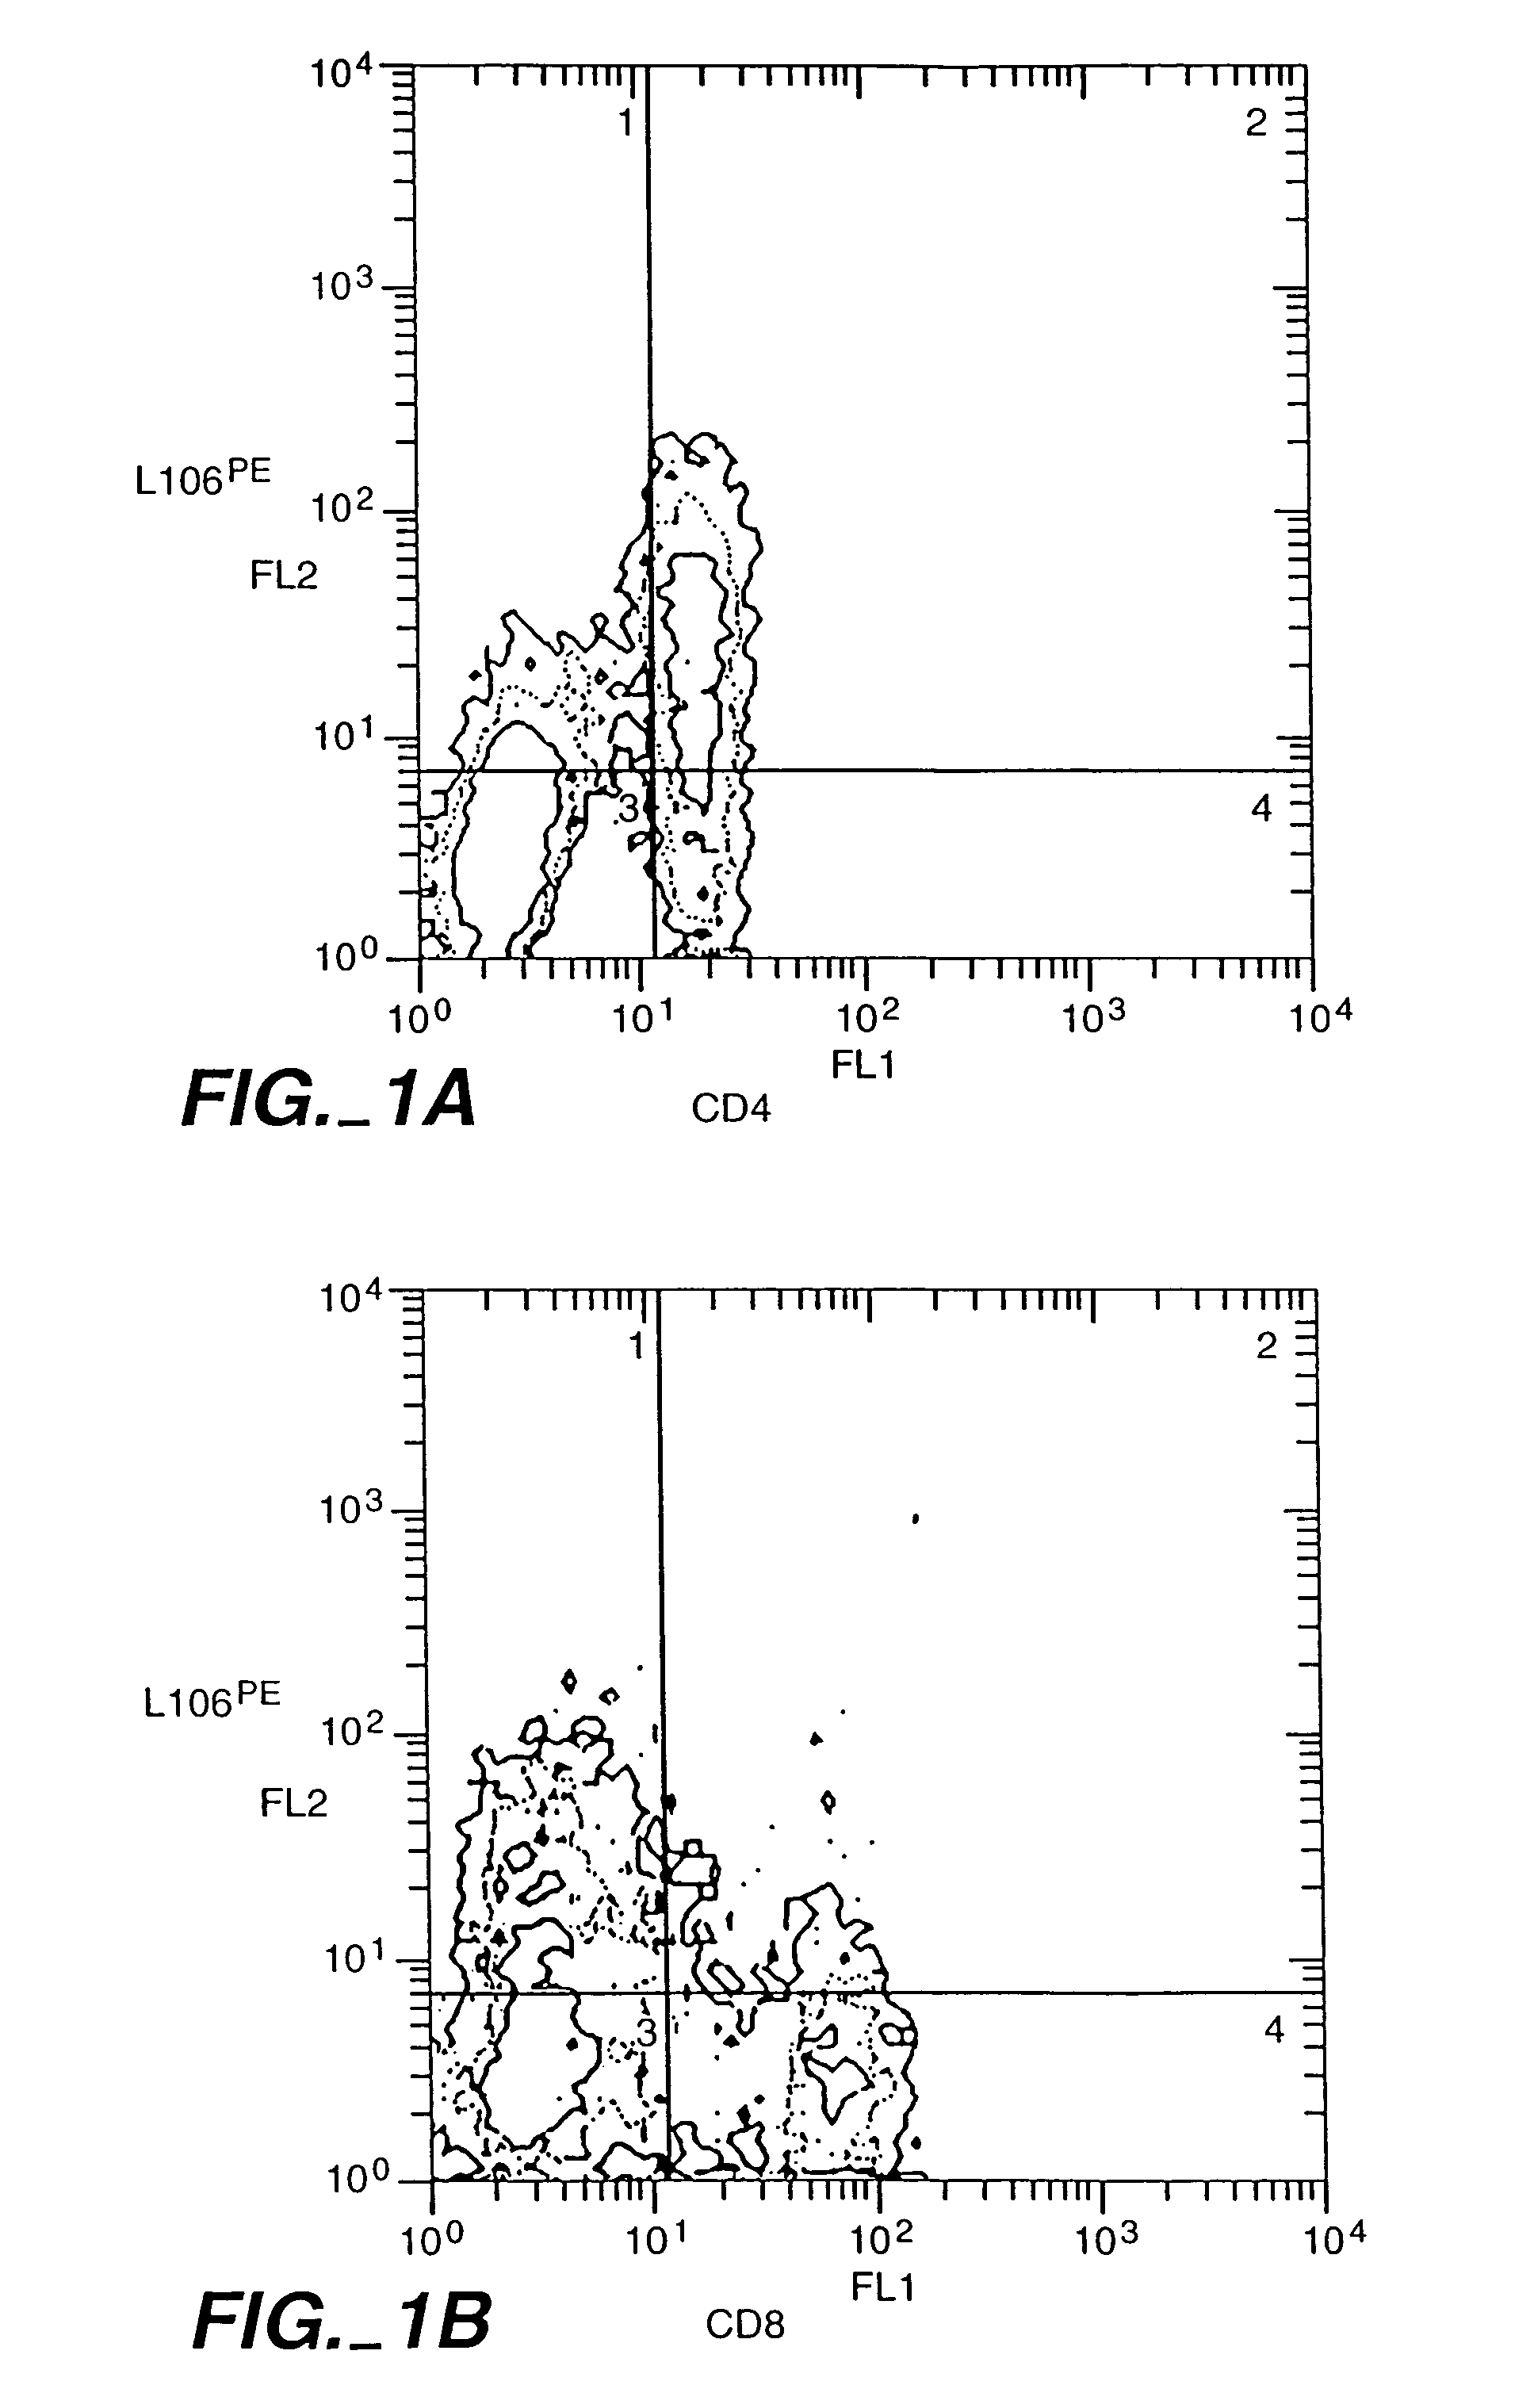 Antibody to receptor on the surface of activated T-cells: ACT-4